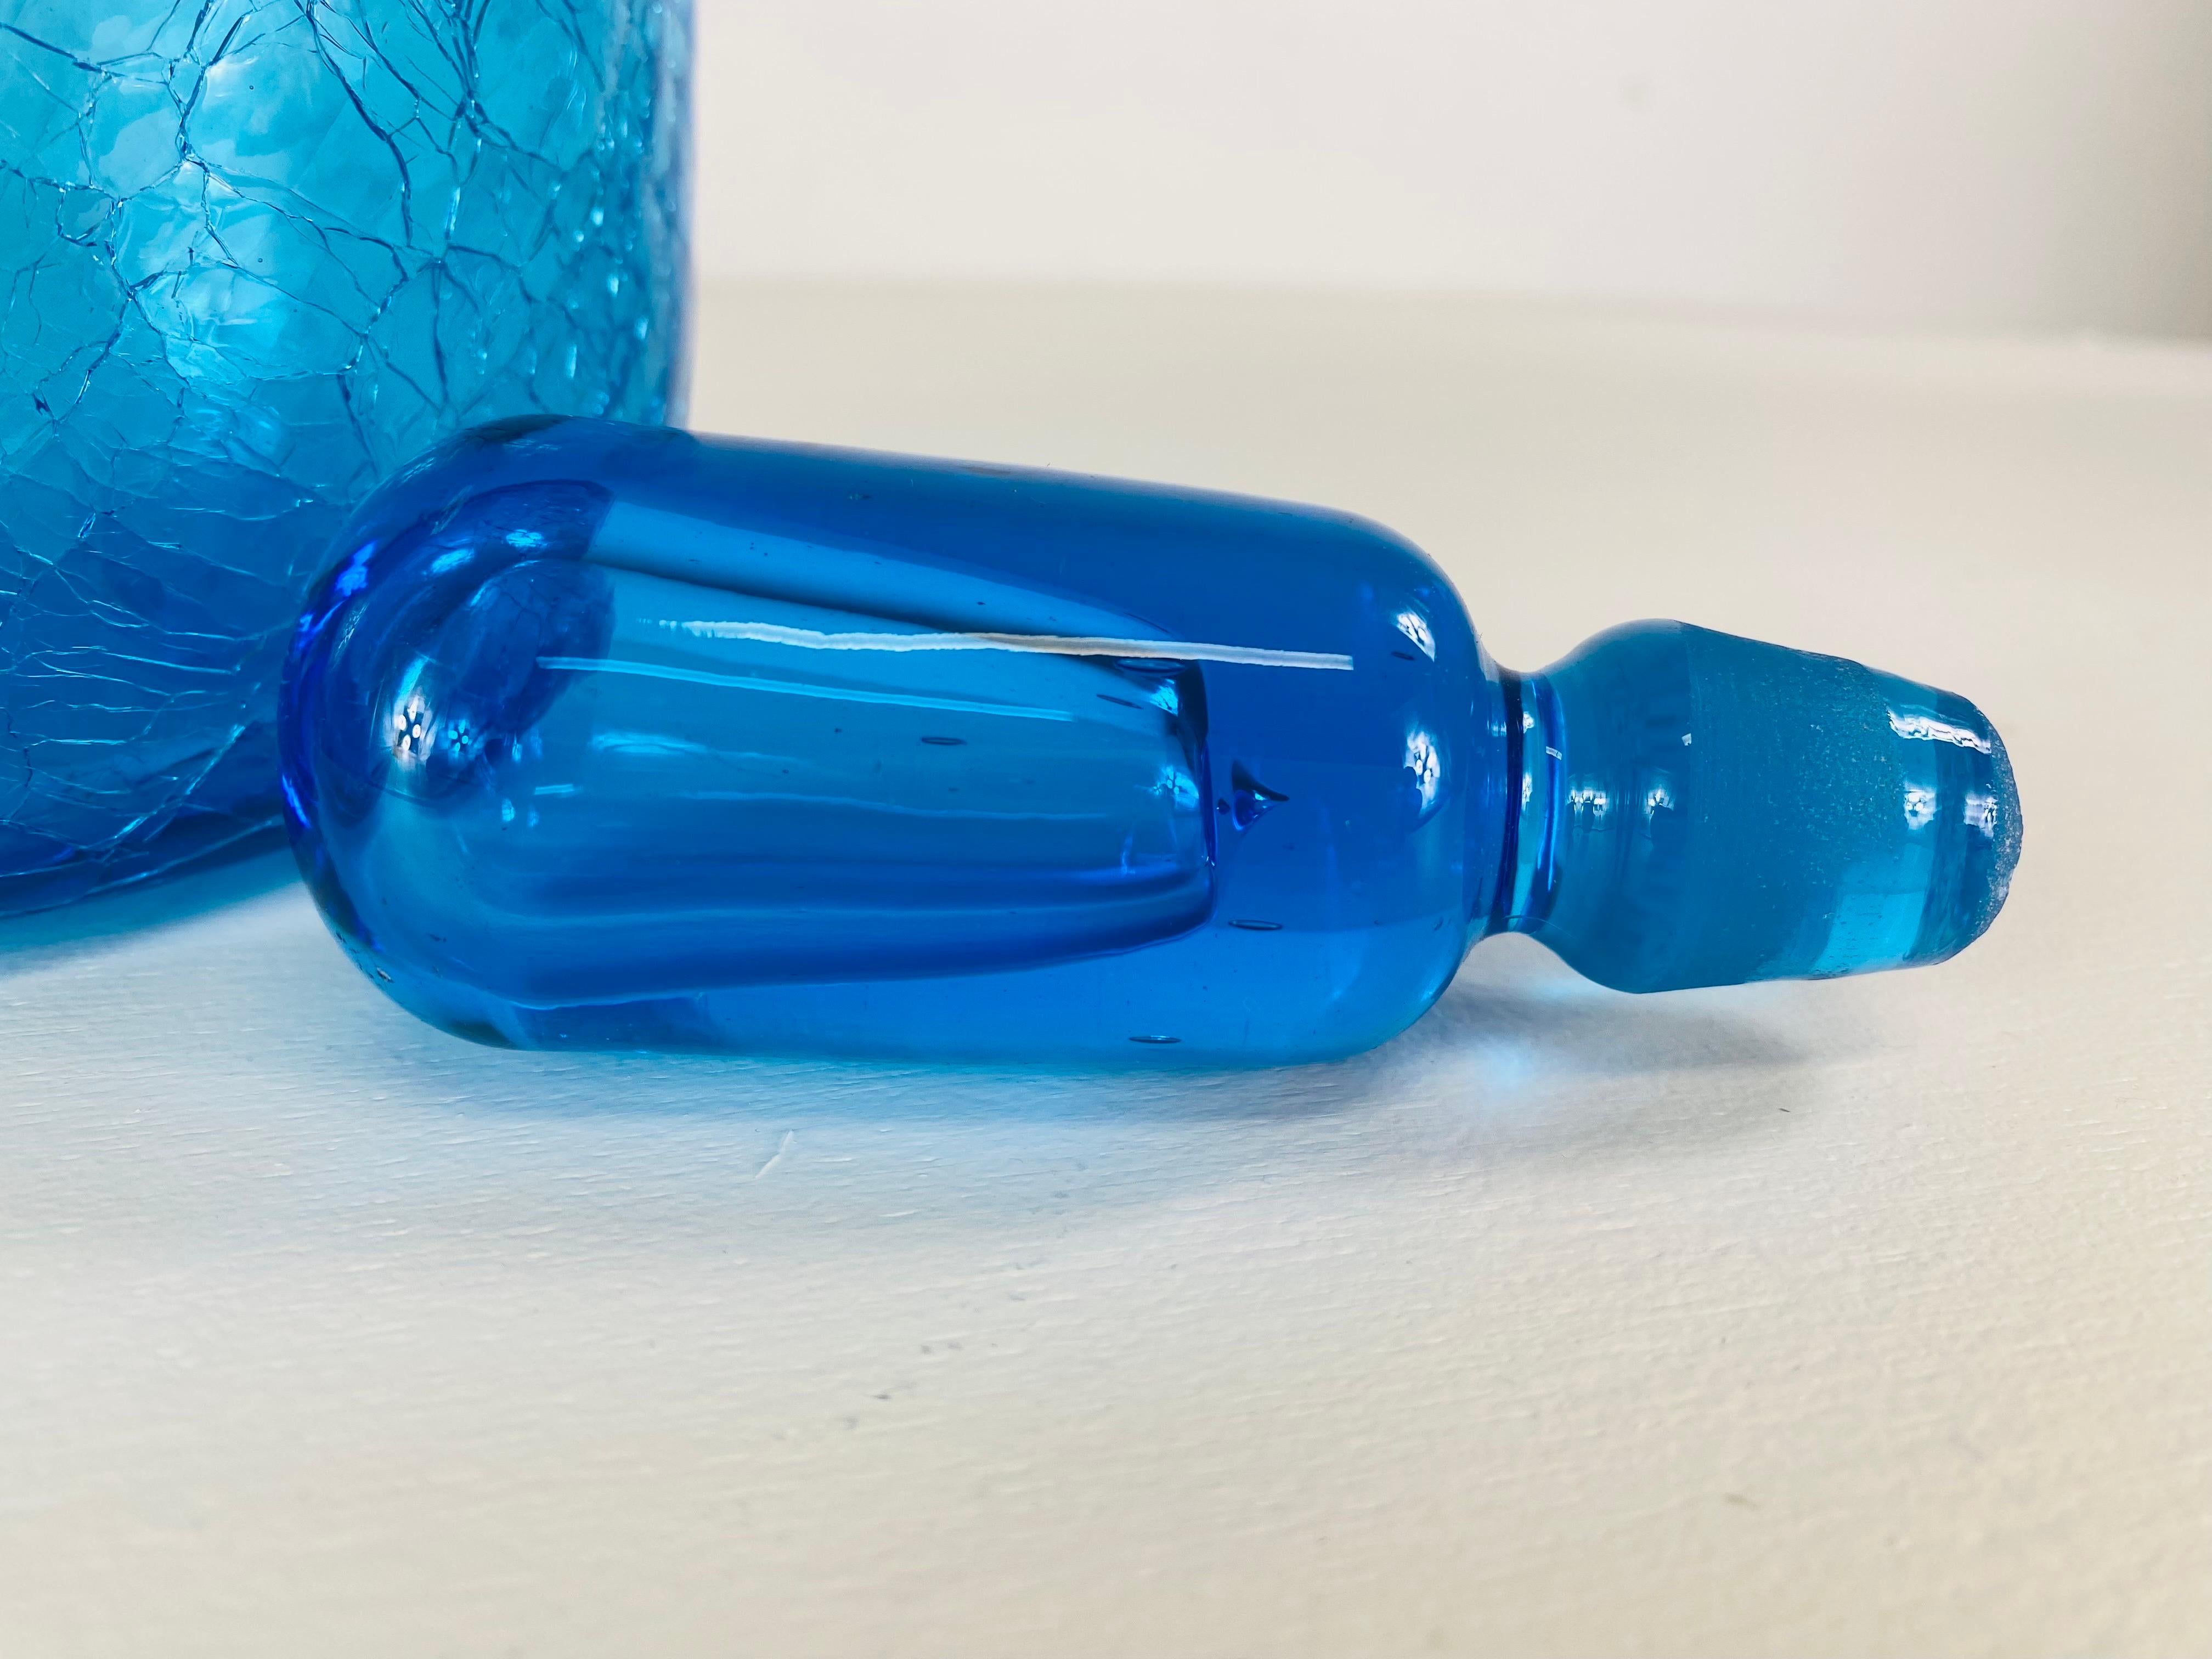 American Mid century vintage Blenko blue glass jar with stopper. For Sale